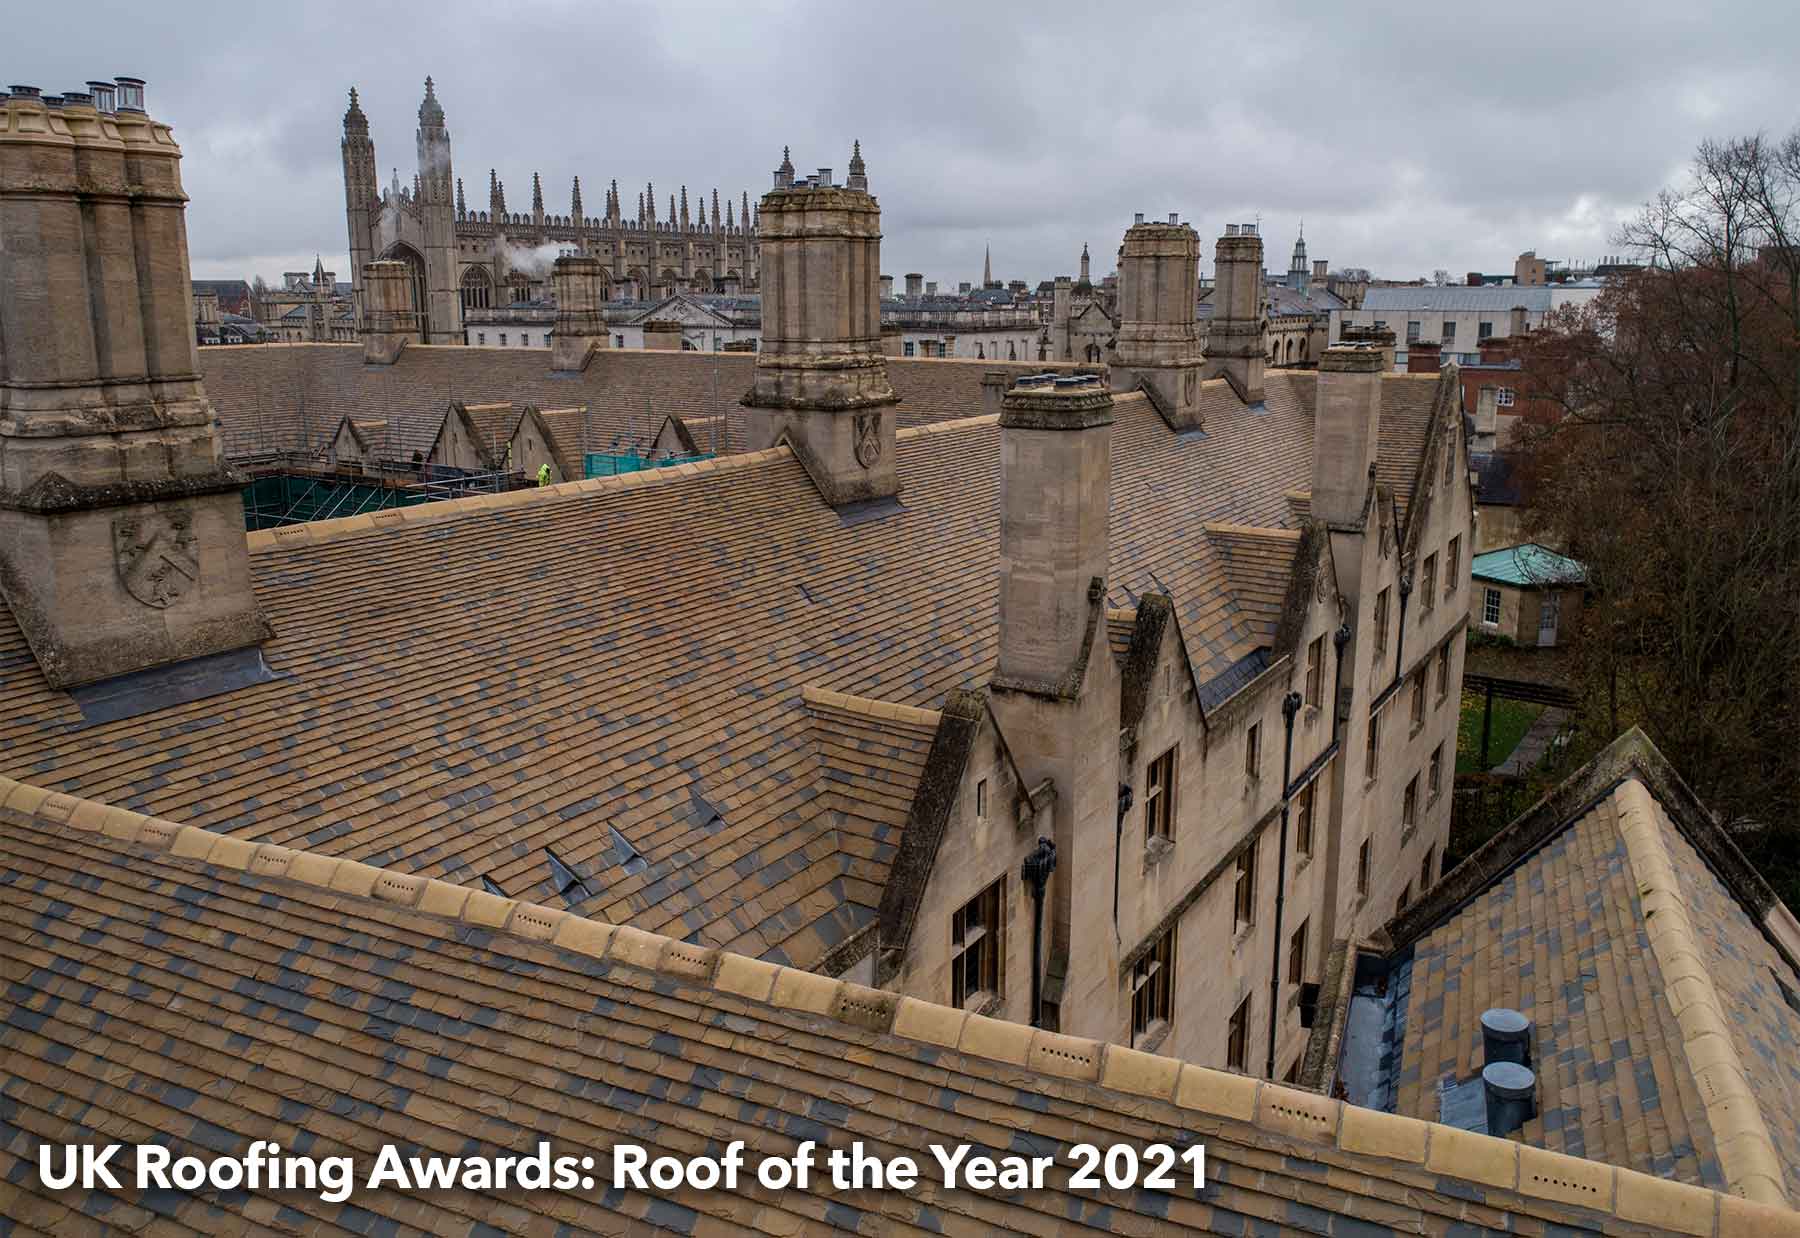 UK Roofing Awards Roof of the Year 2021